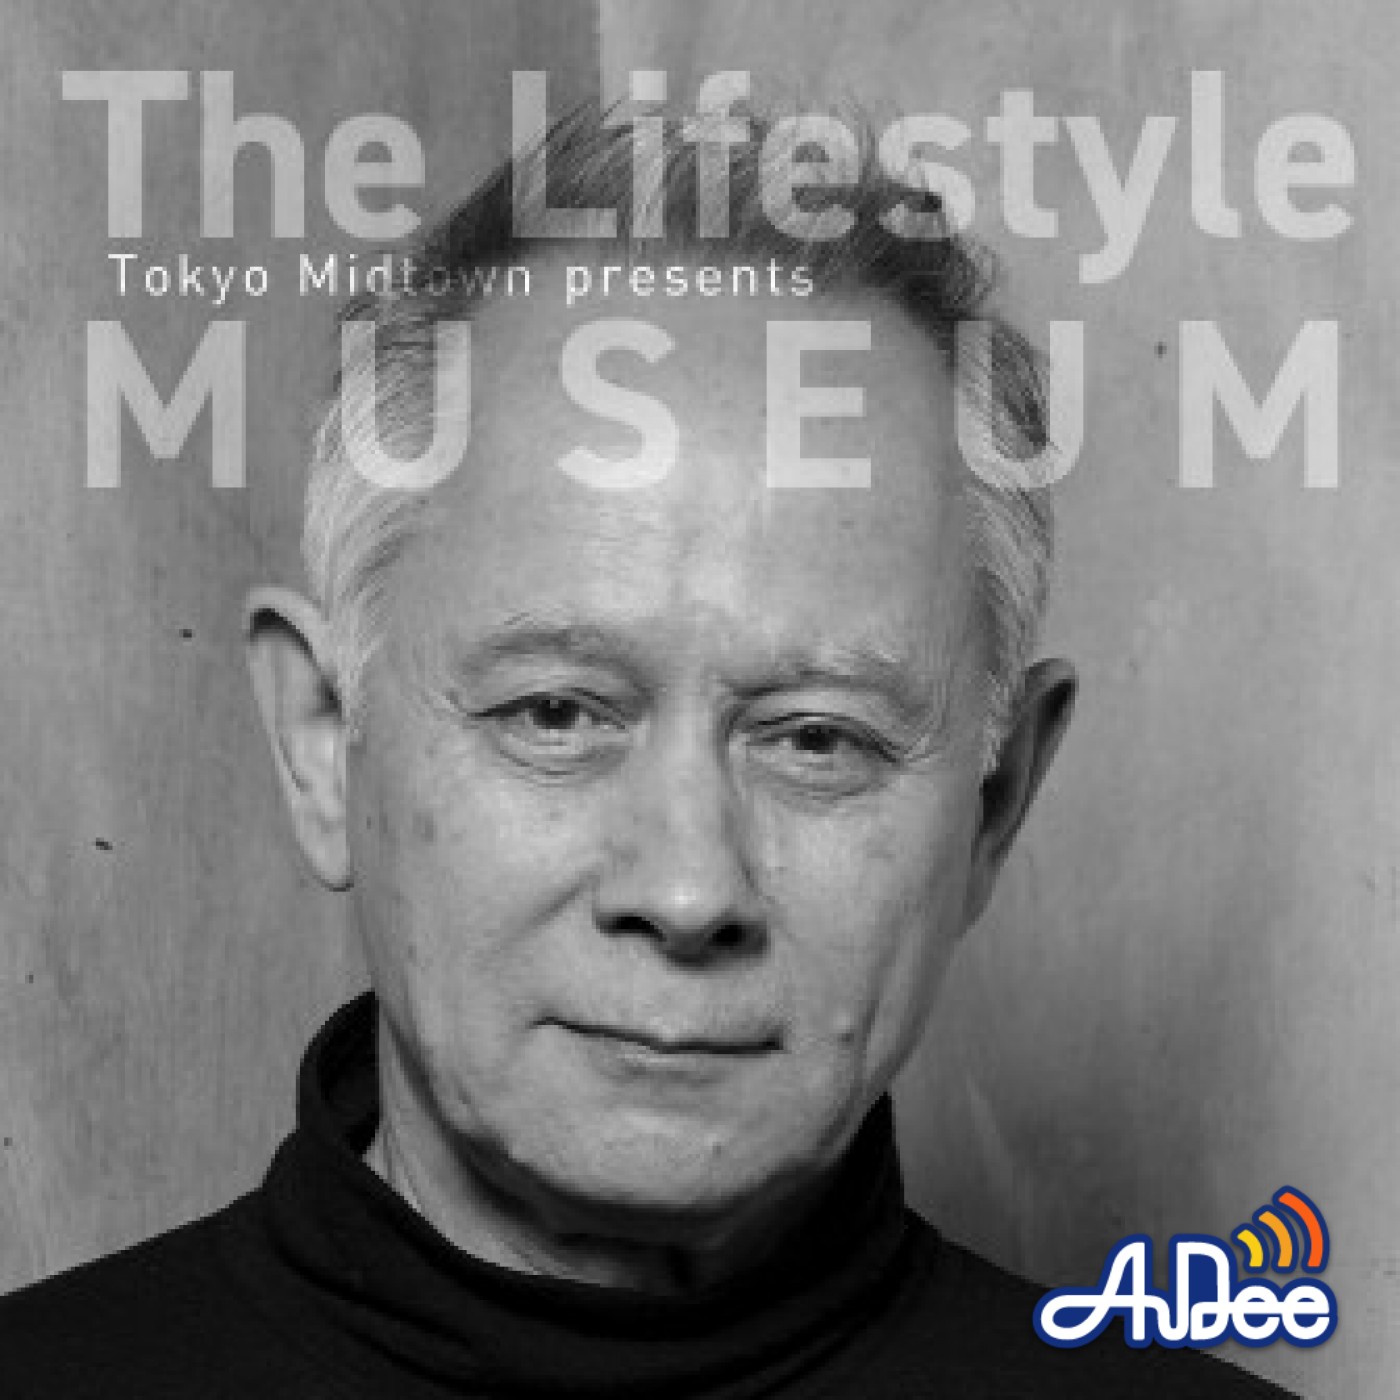 Tokyo Midtown presents The Lifestyle MUSEUM|ゲスト：小林弘幸さん 